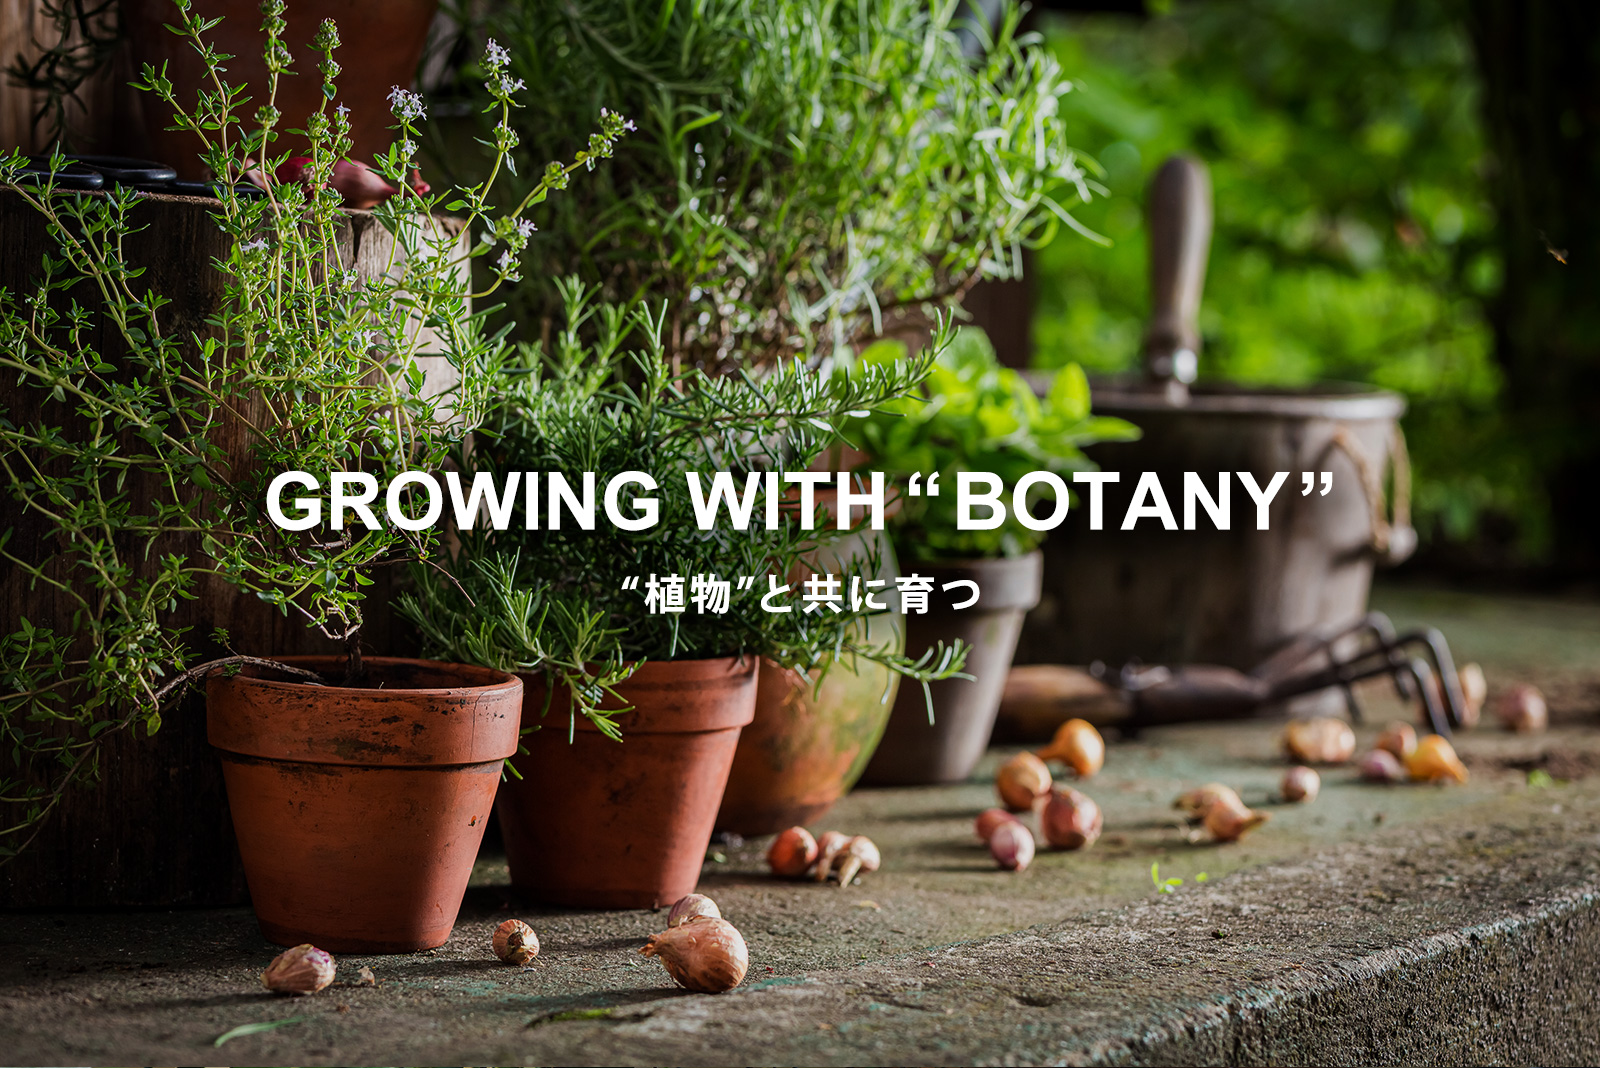 growing with botany 植物と共に育つ ガーデニング